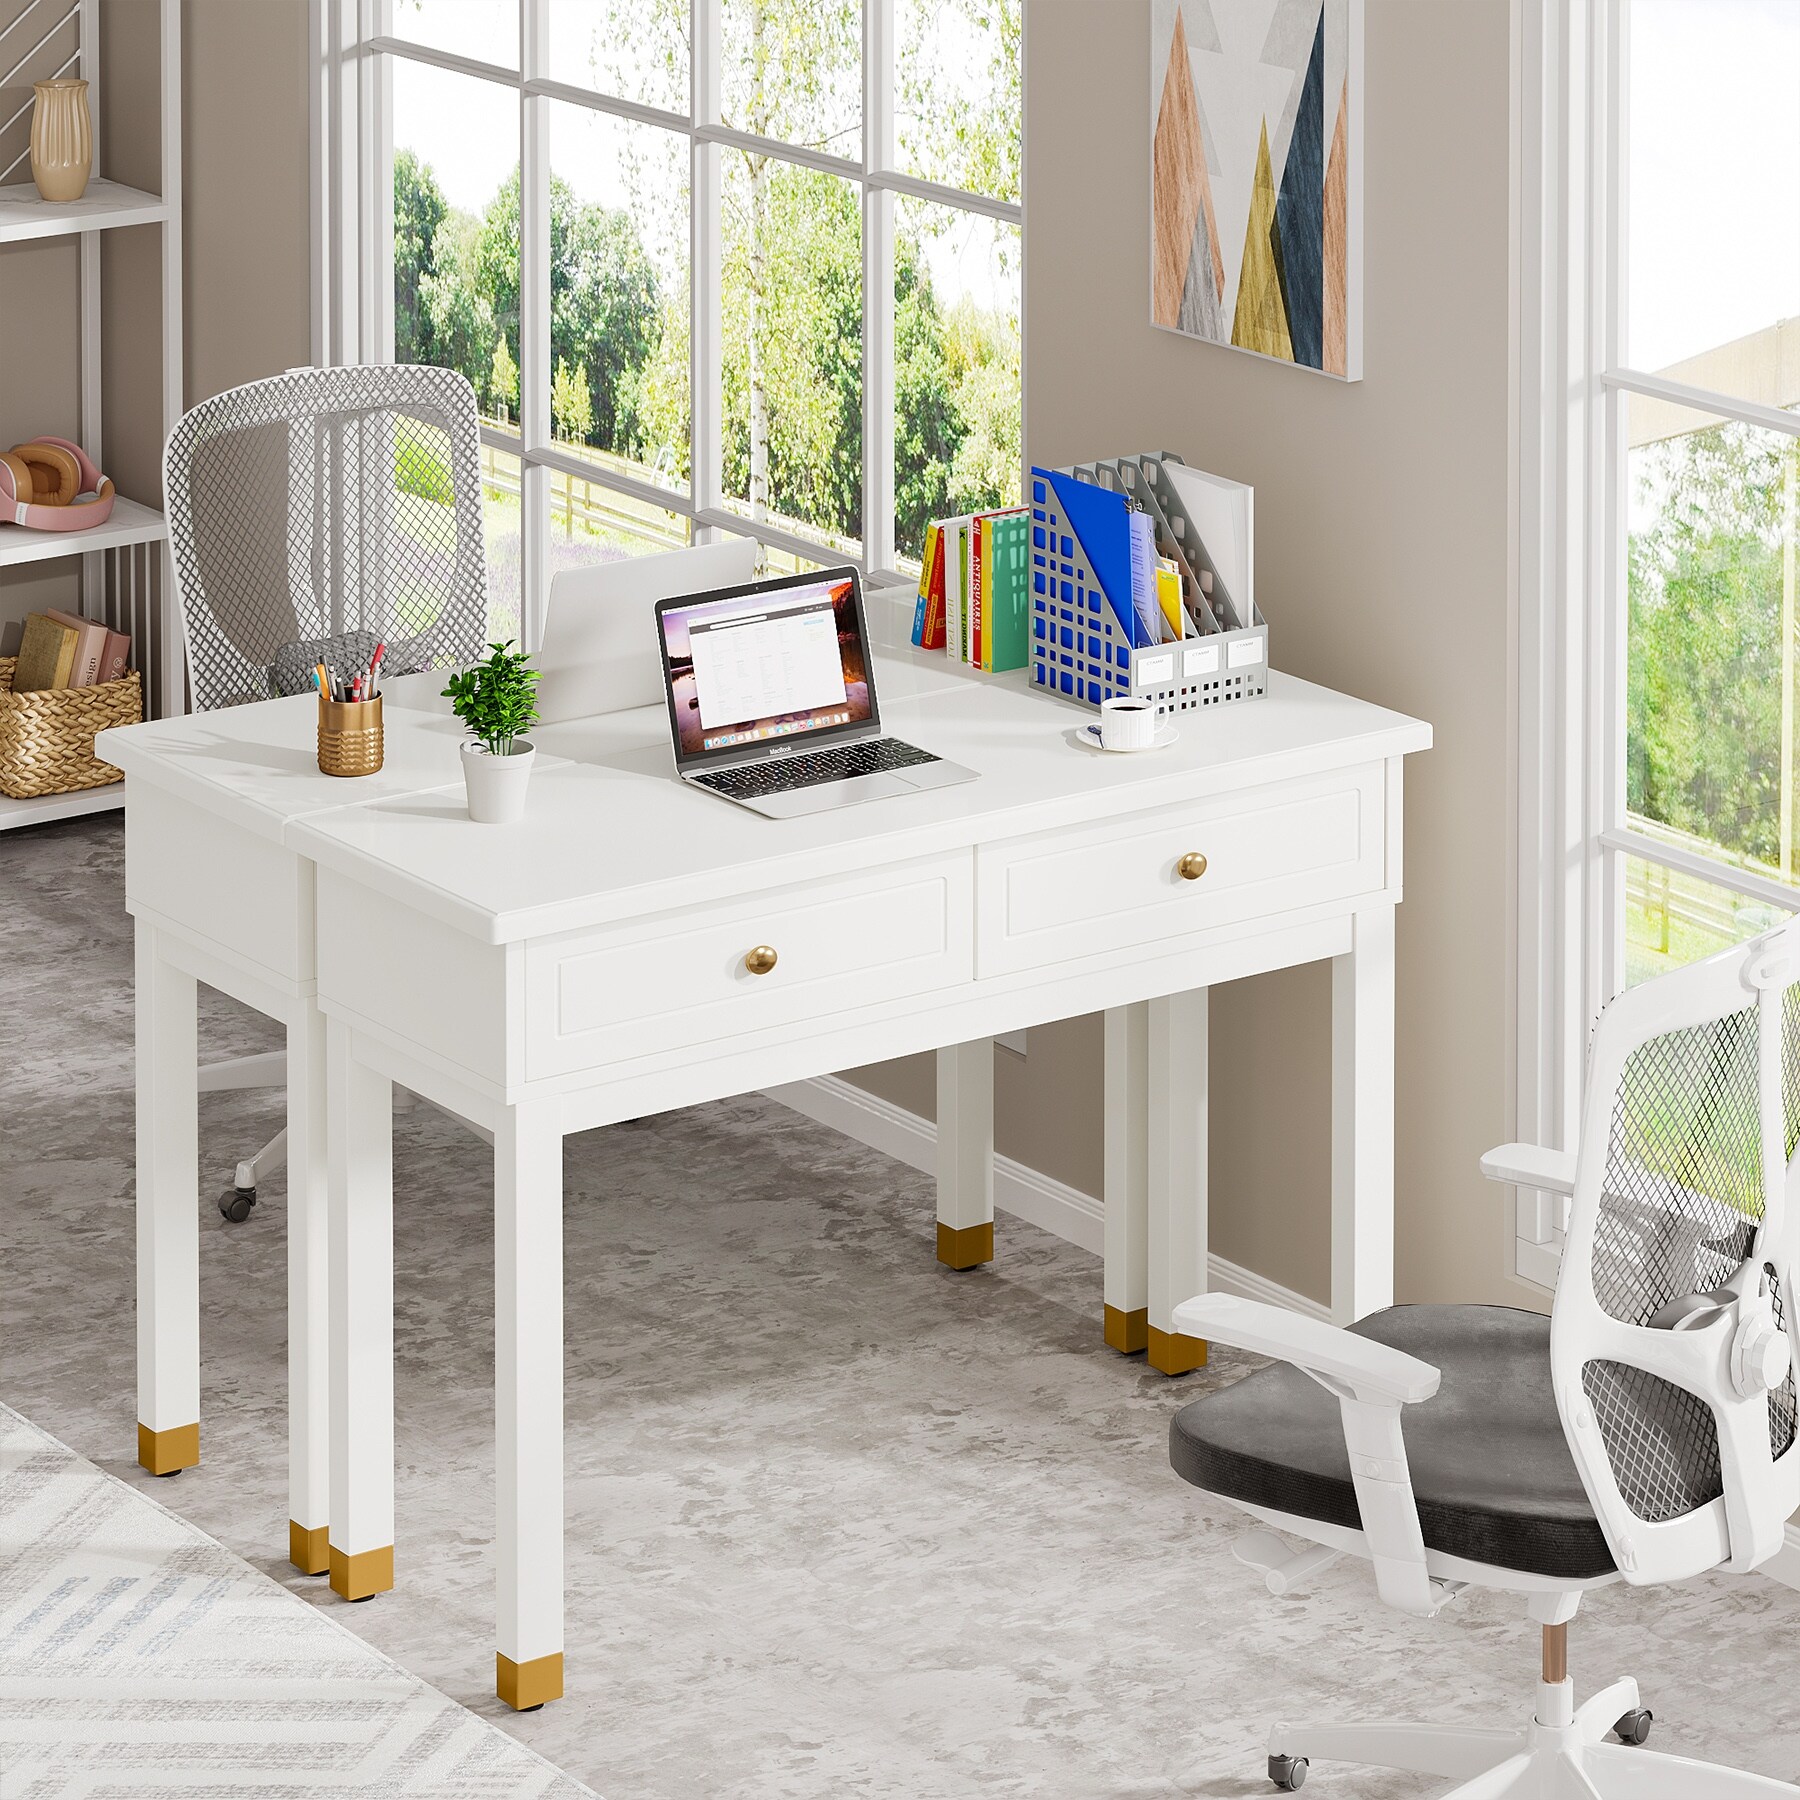 https://ak1.ostkcdn.com/images/products/is/images/direct/2fd7aeff14e12f8ff2715efe90ff51459128b261/43-Inch-Computer-Desk-Small-White-Desk-with-Storage-for-Home-Office%2C-Bedroom.jpg